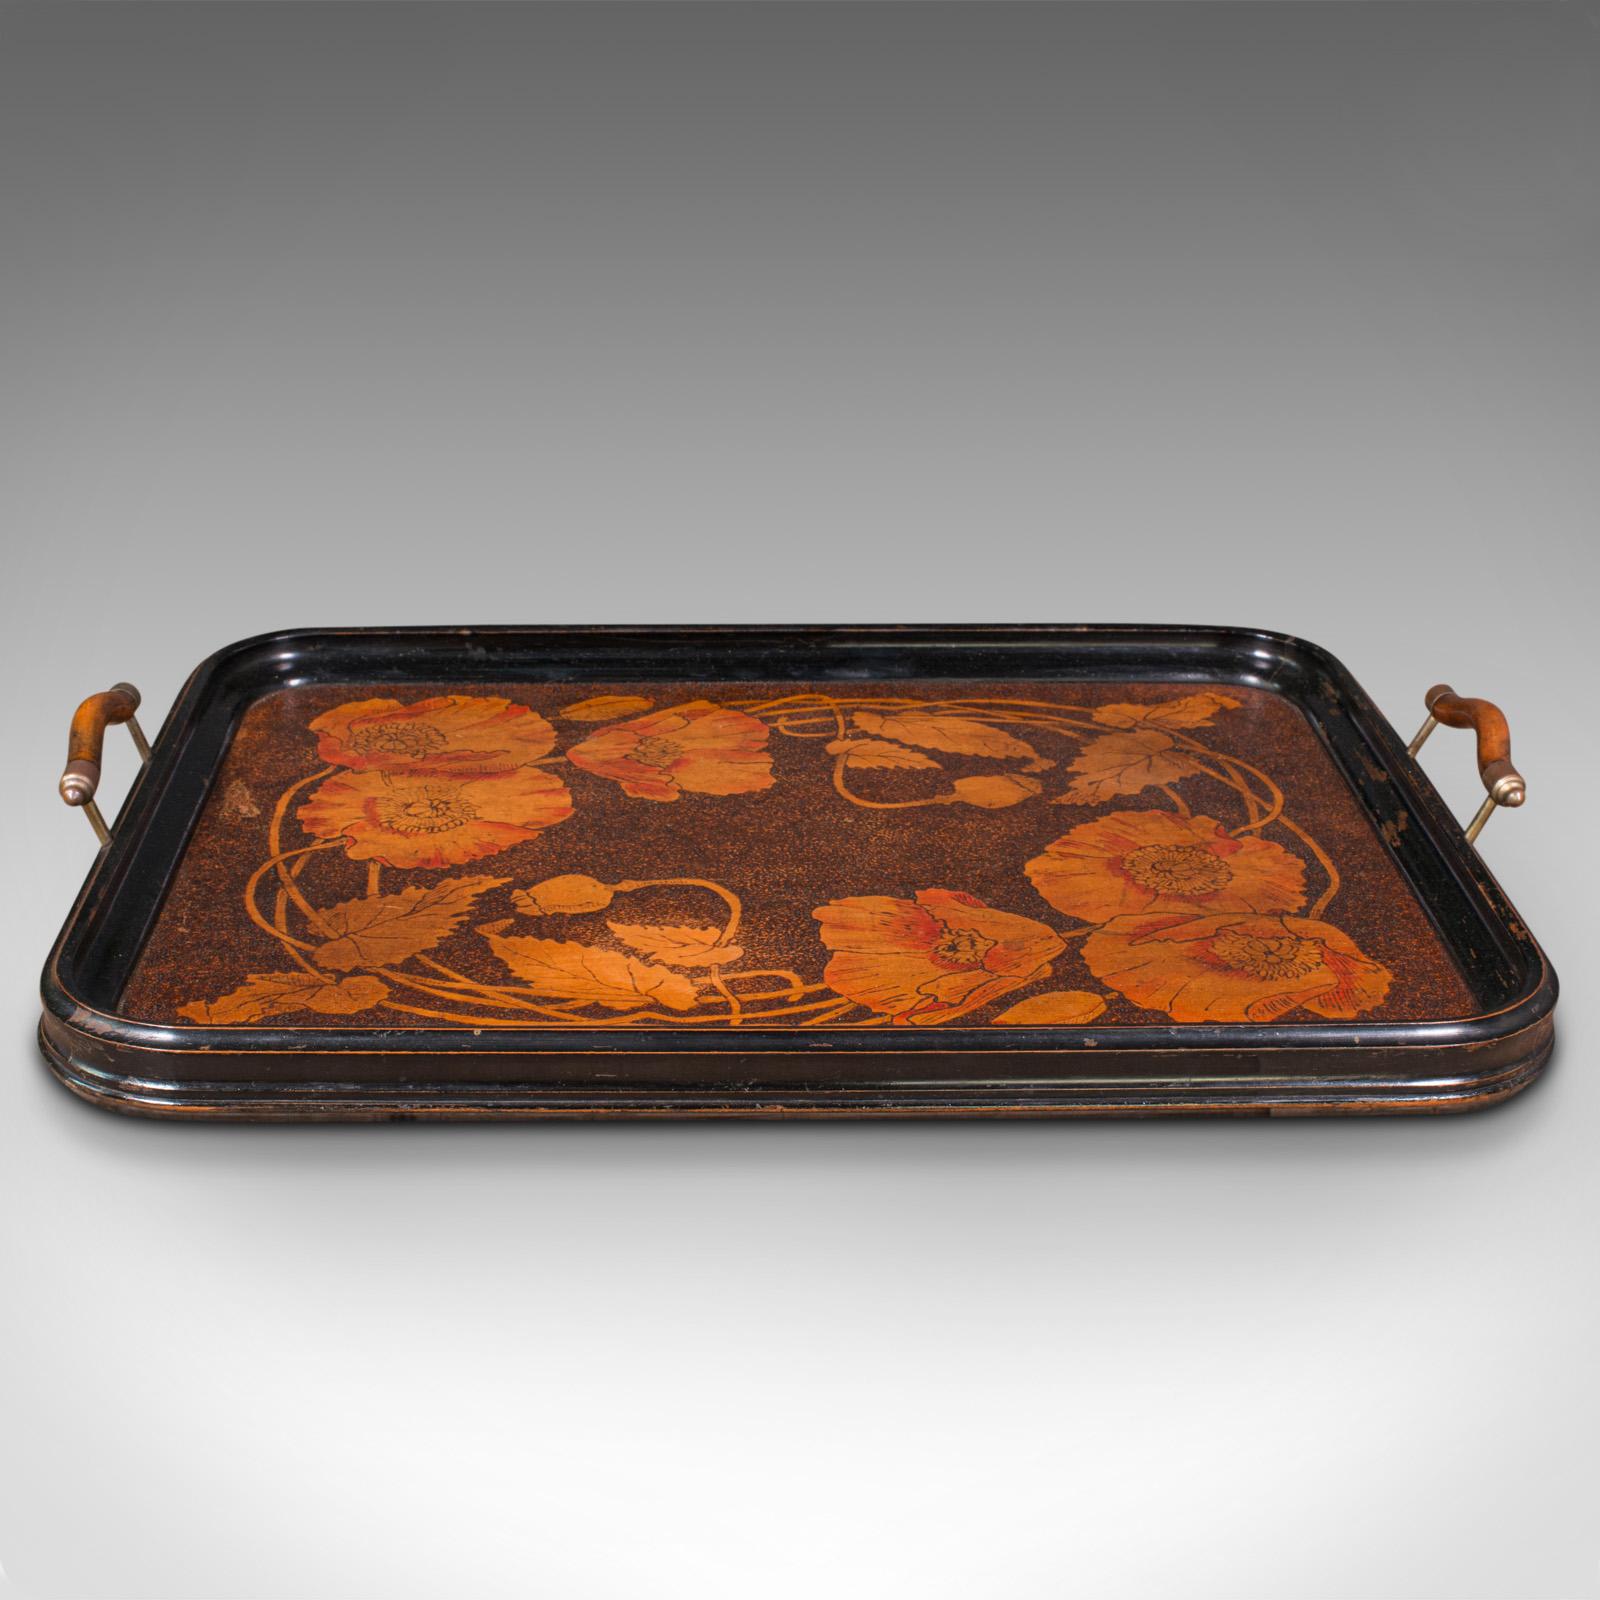 This is an antique decorative serving tray. An English, beech and mahogany tray with hand-finished detail in the Art Nouveau taste, dated to the late Edwardian period, 1909.

Appealing example of Art Nouveau with eye-catching finish
Displays a